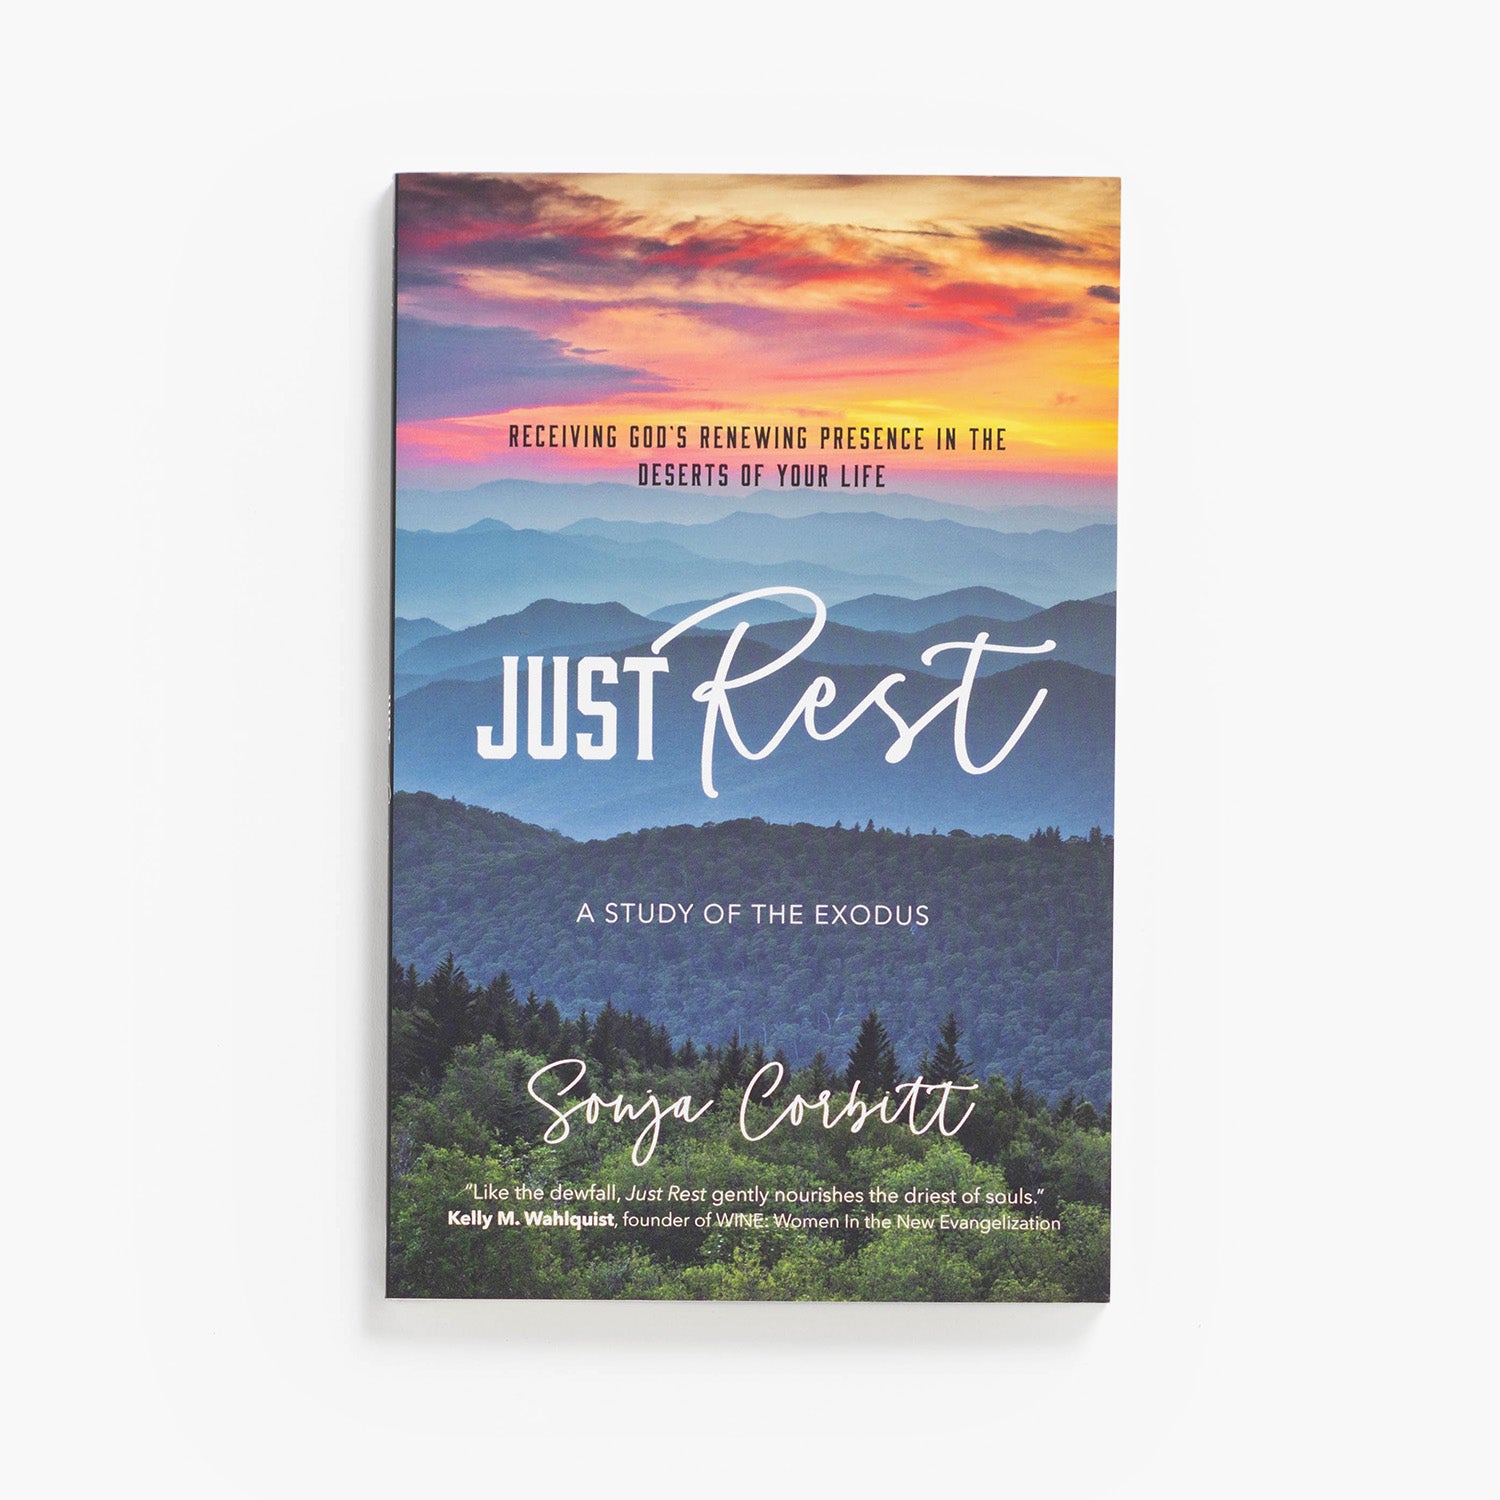 Just Rest: Receiving God’s Renewing Presence in the Deserts of Your Life